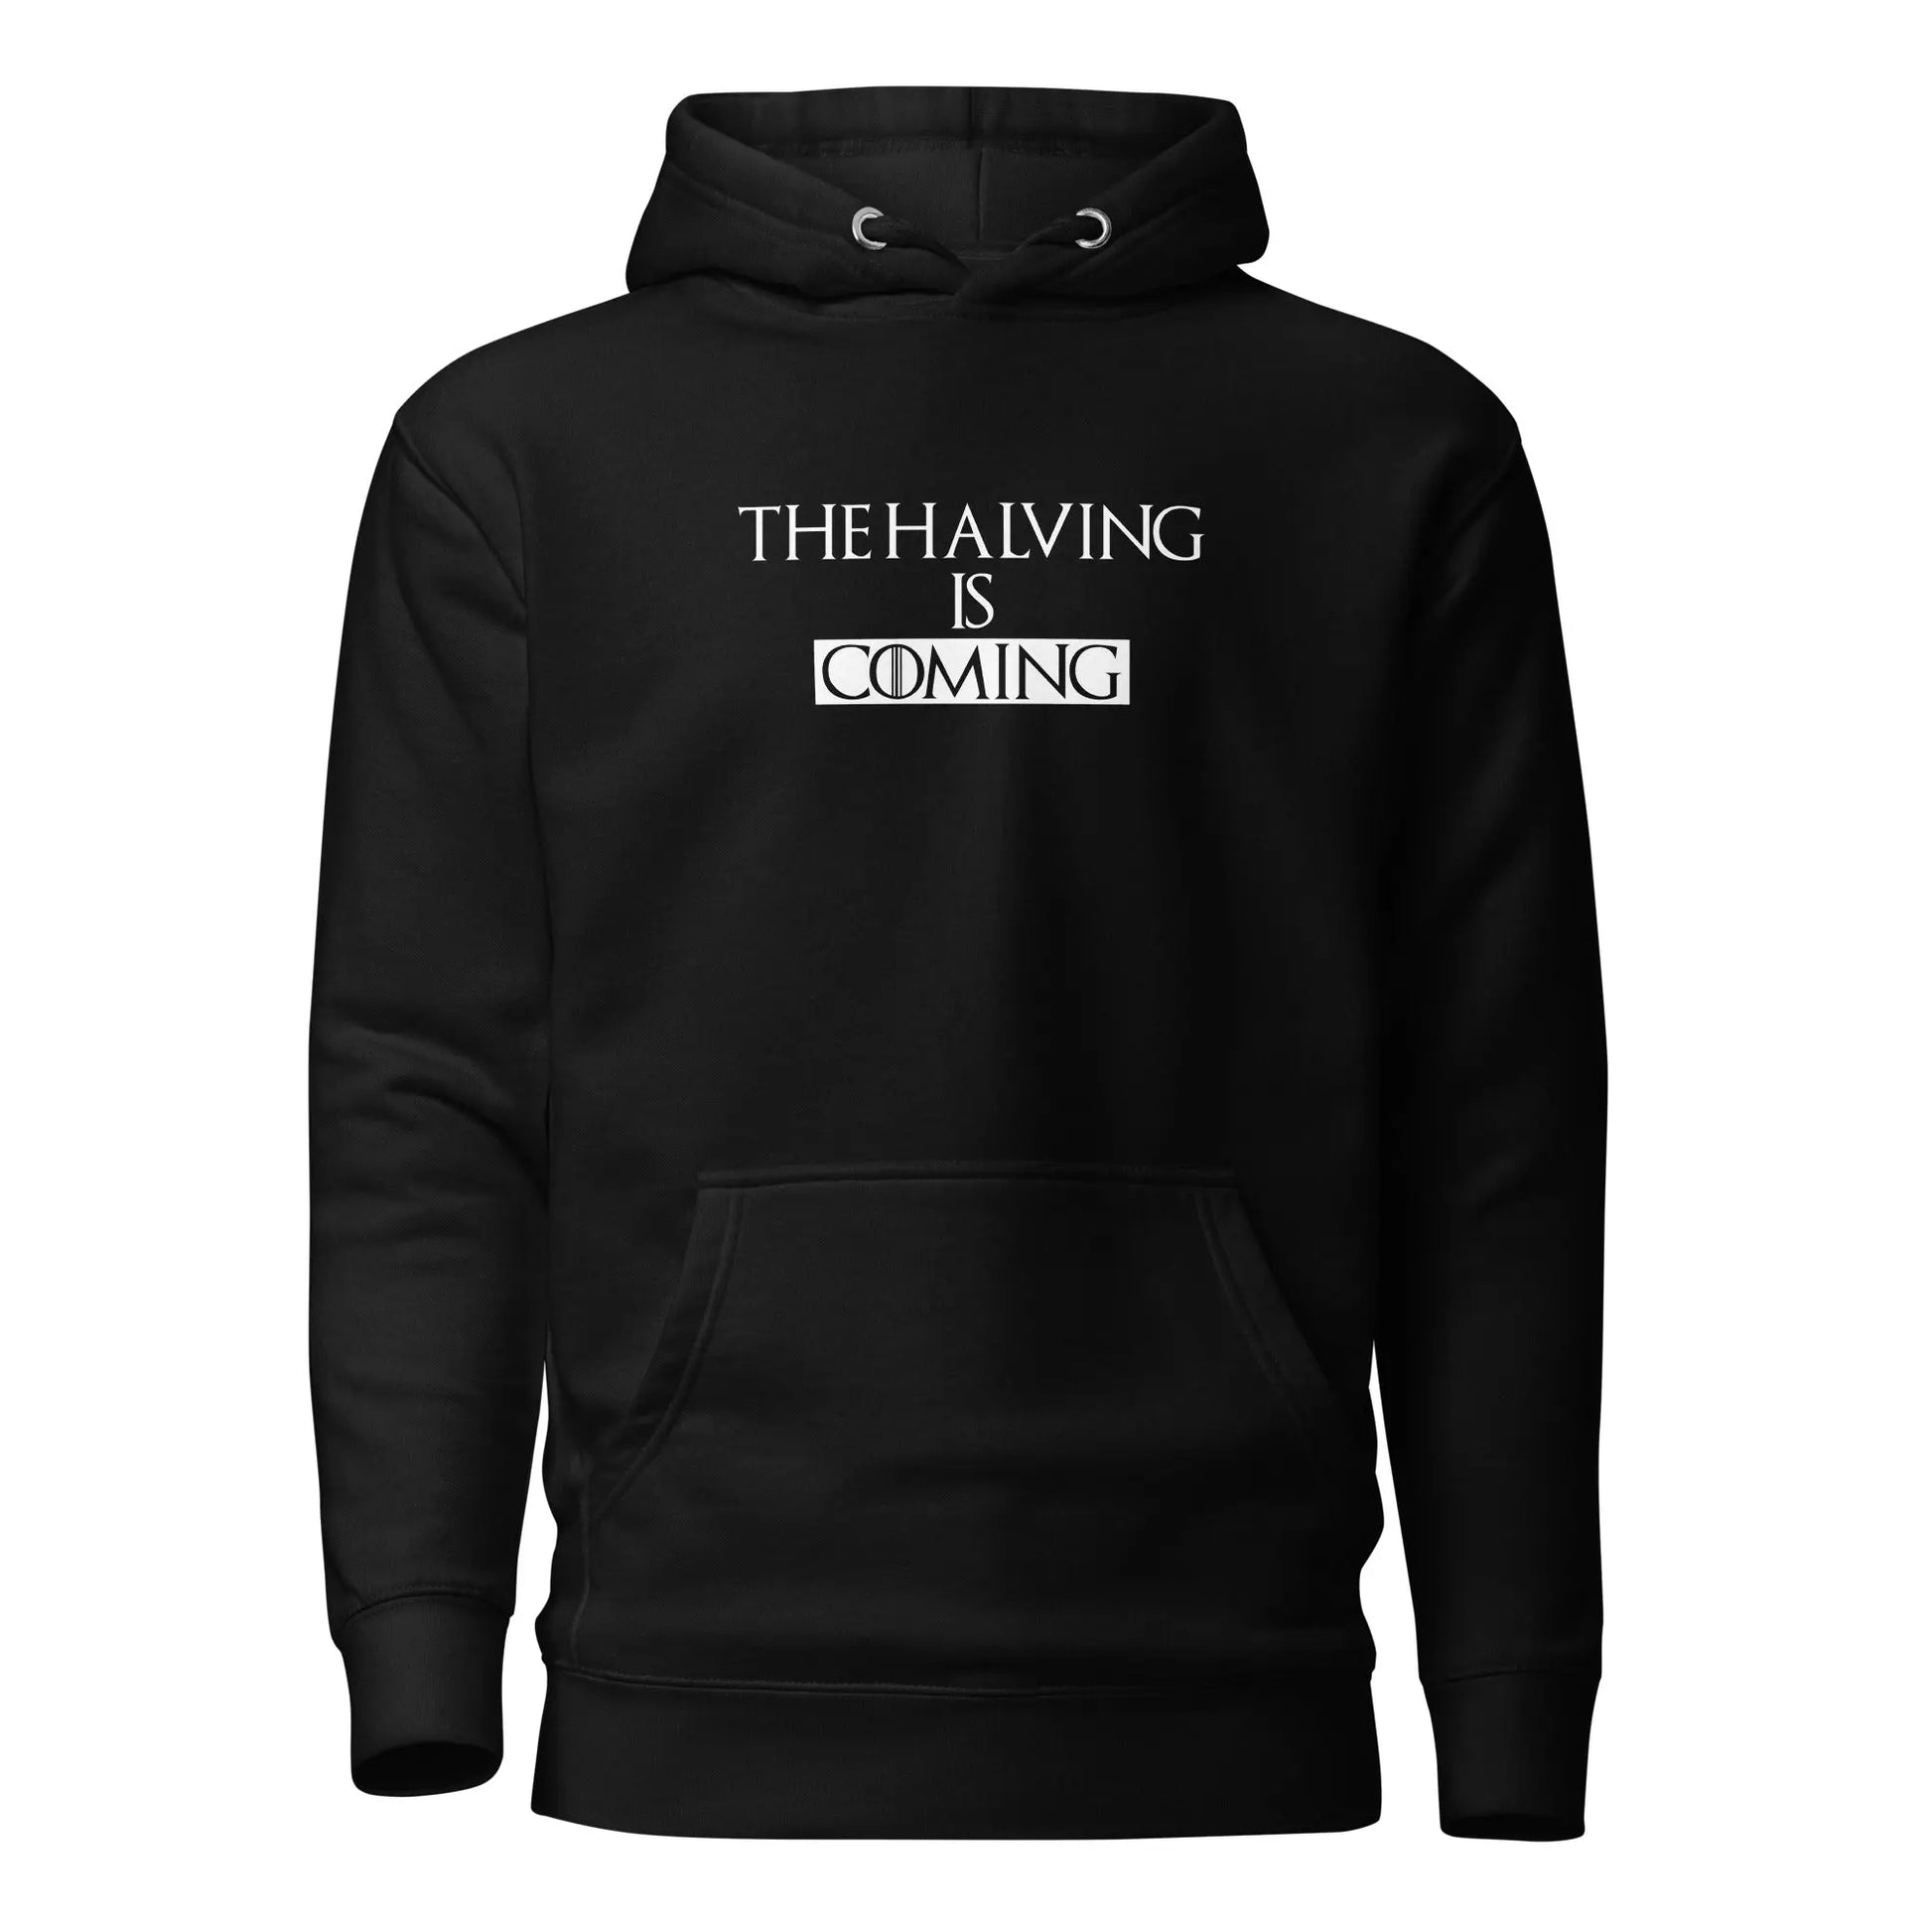 The Halving Is Coming - Premium Unisex Bitcoin Hoodie Black Color